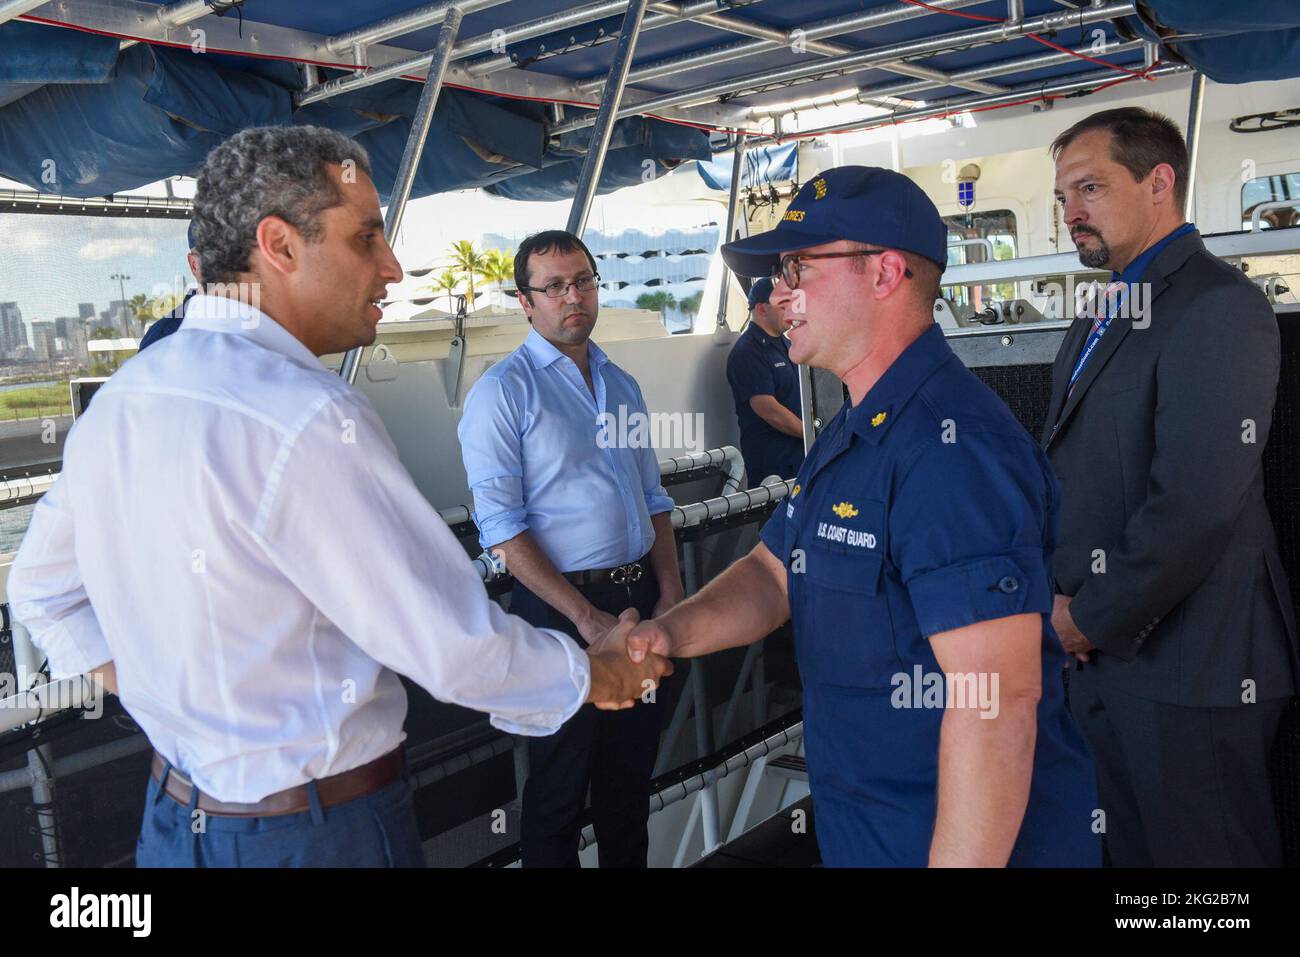 Robert Silvers, Under Secretary for Policy for the Department of Homeland Security is greeted by Lt. Cmdr. Ryan Webster, commanding officer of the Coast Guard Cutter William Flores, at Coast Guard Base Miami Beach, Oct. 25, 2022. The purpose of Under Secretary Silvers’ visit was to discuss lines of effort including readiness, partnership efforts within migrant operations and counter drug missions in the Caribbean and Florida region. Stock Photo